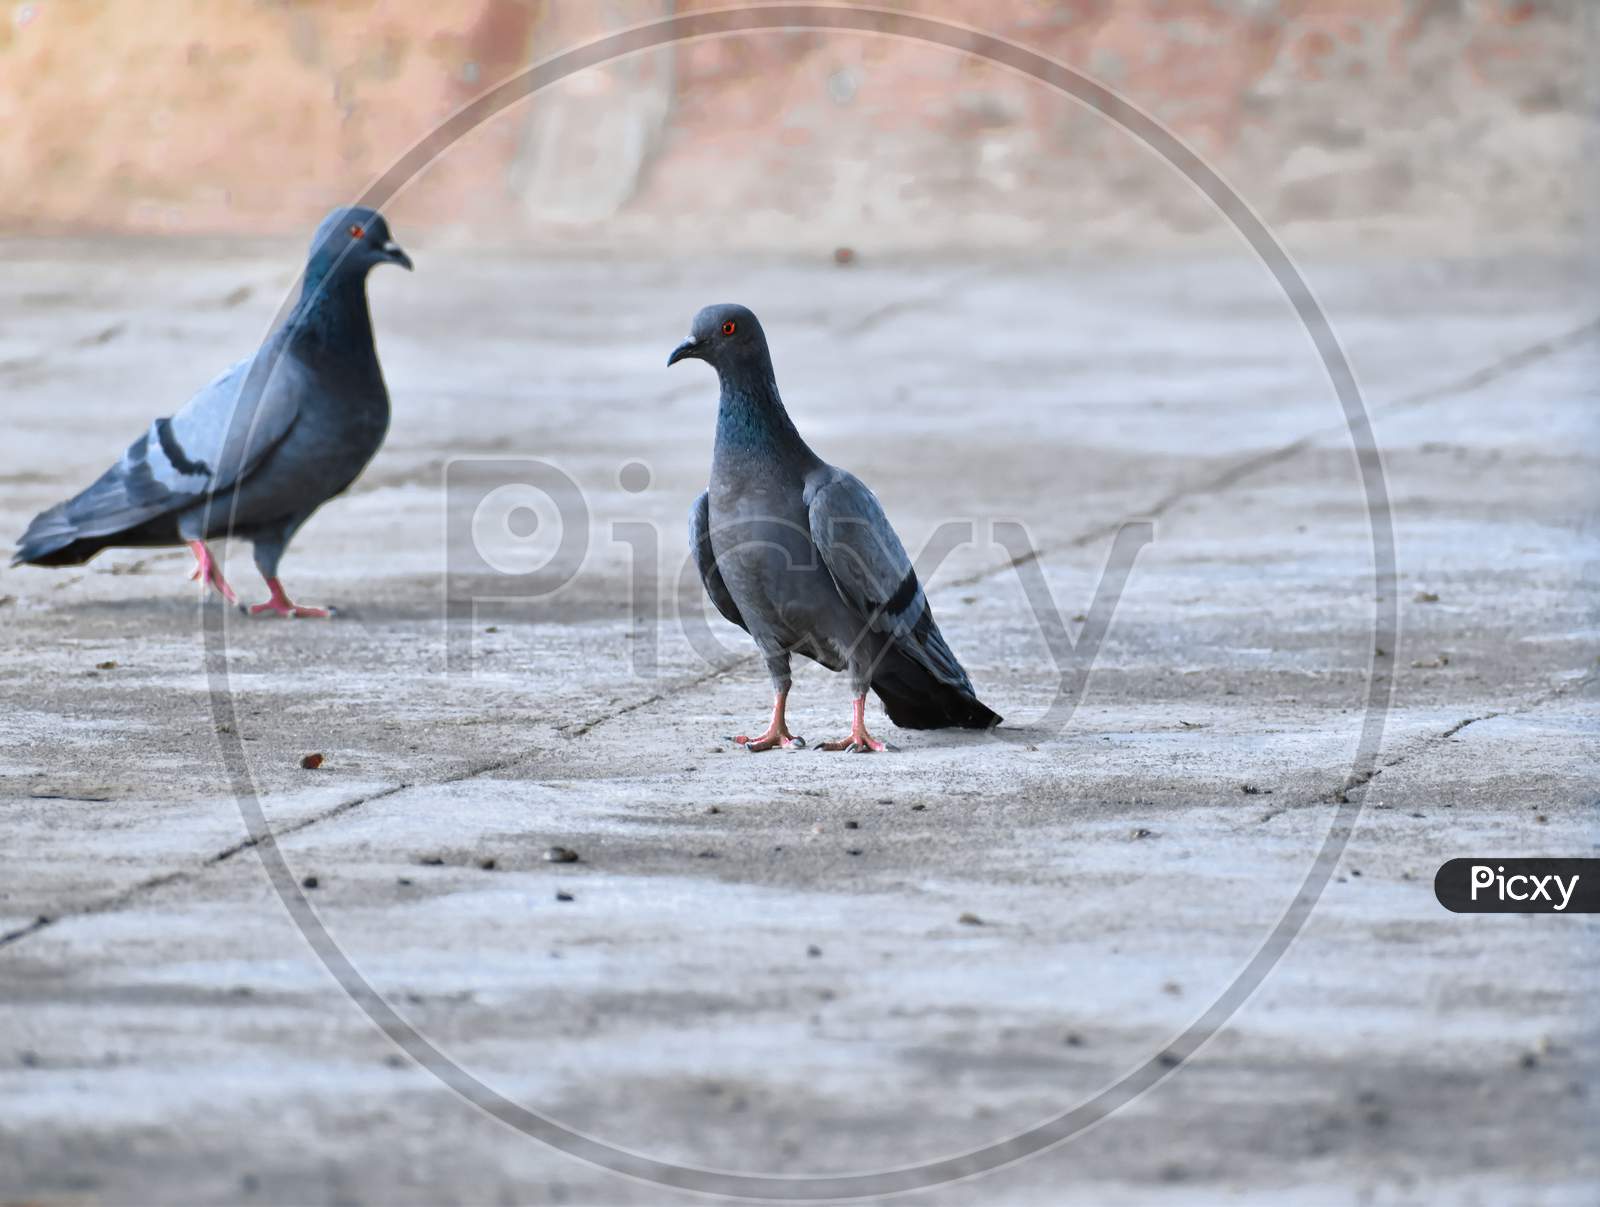 two piegions on the concrete floor looking for food. Selectively focused